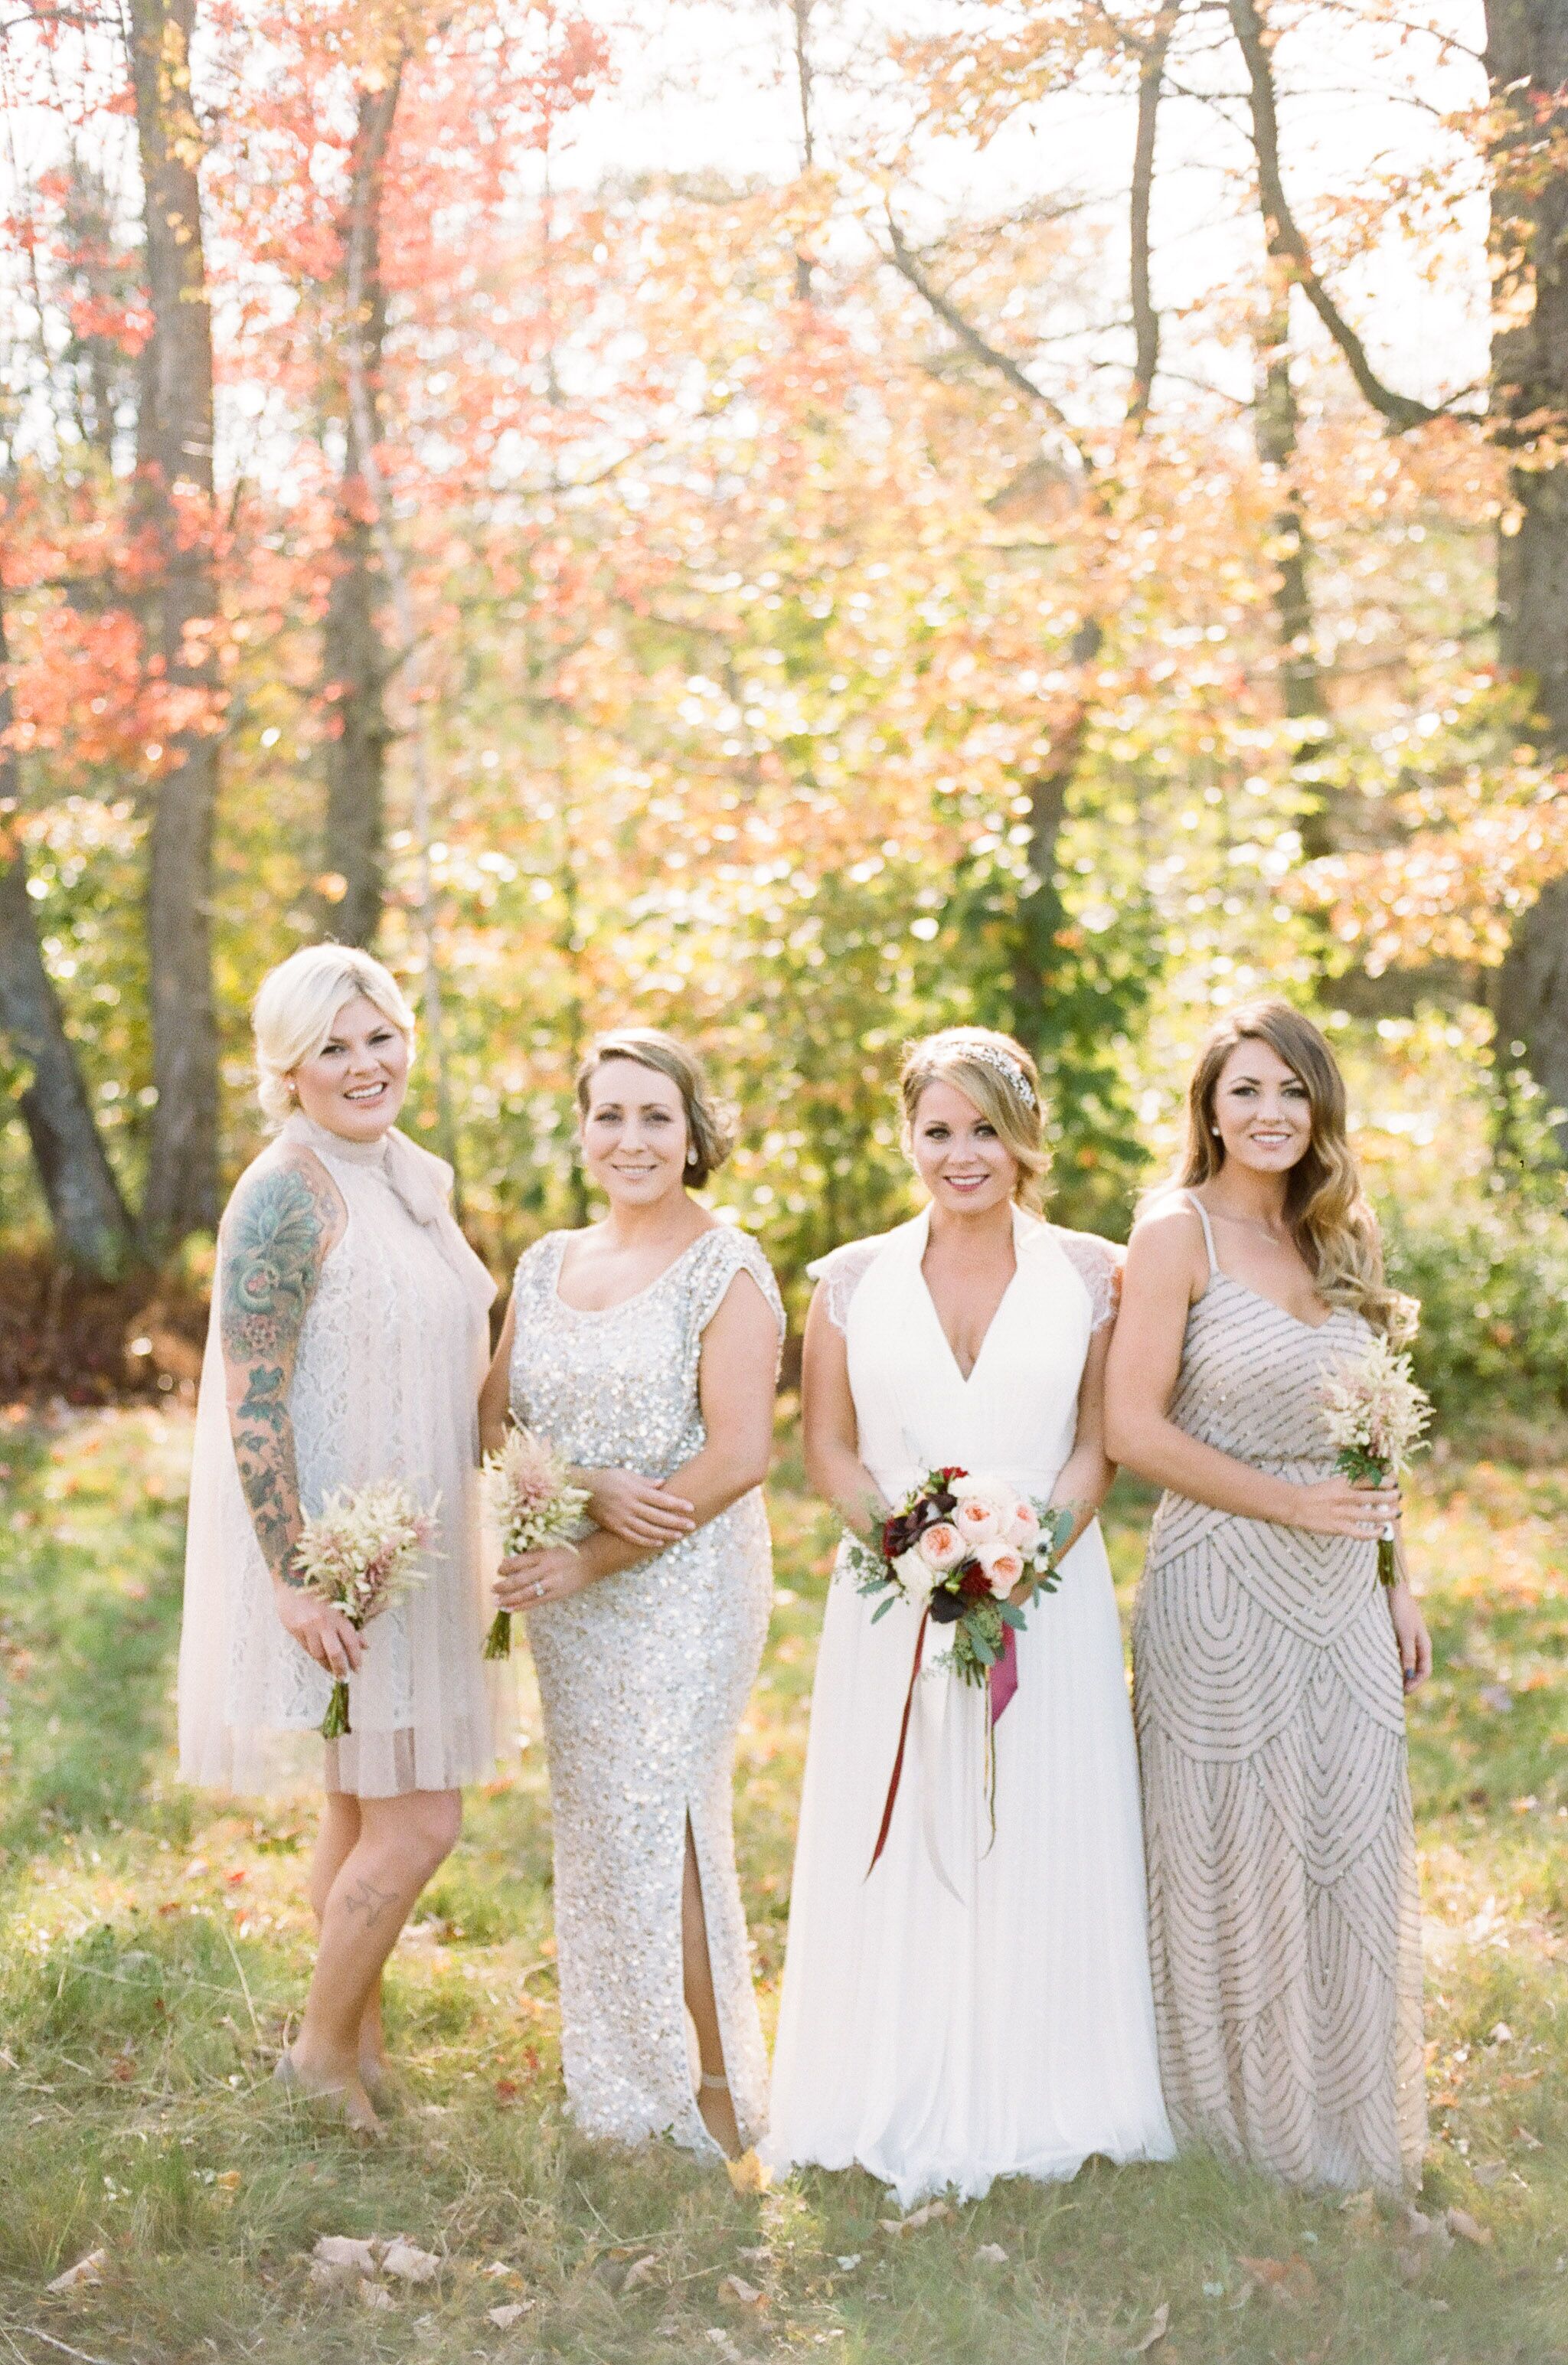 Glam Shimmery Champagne Bridesmaid Dresses